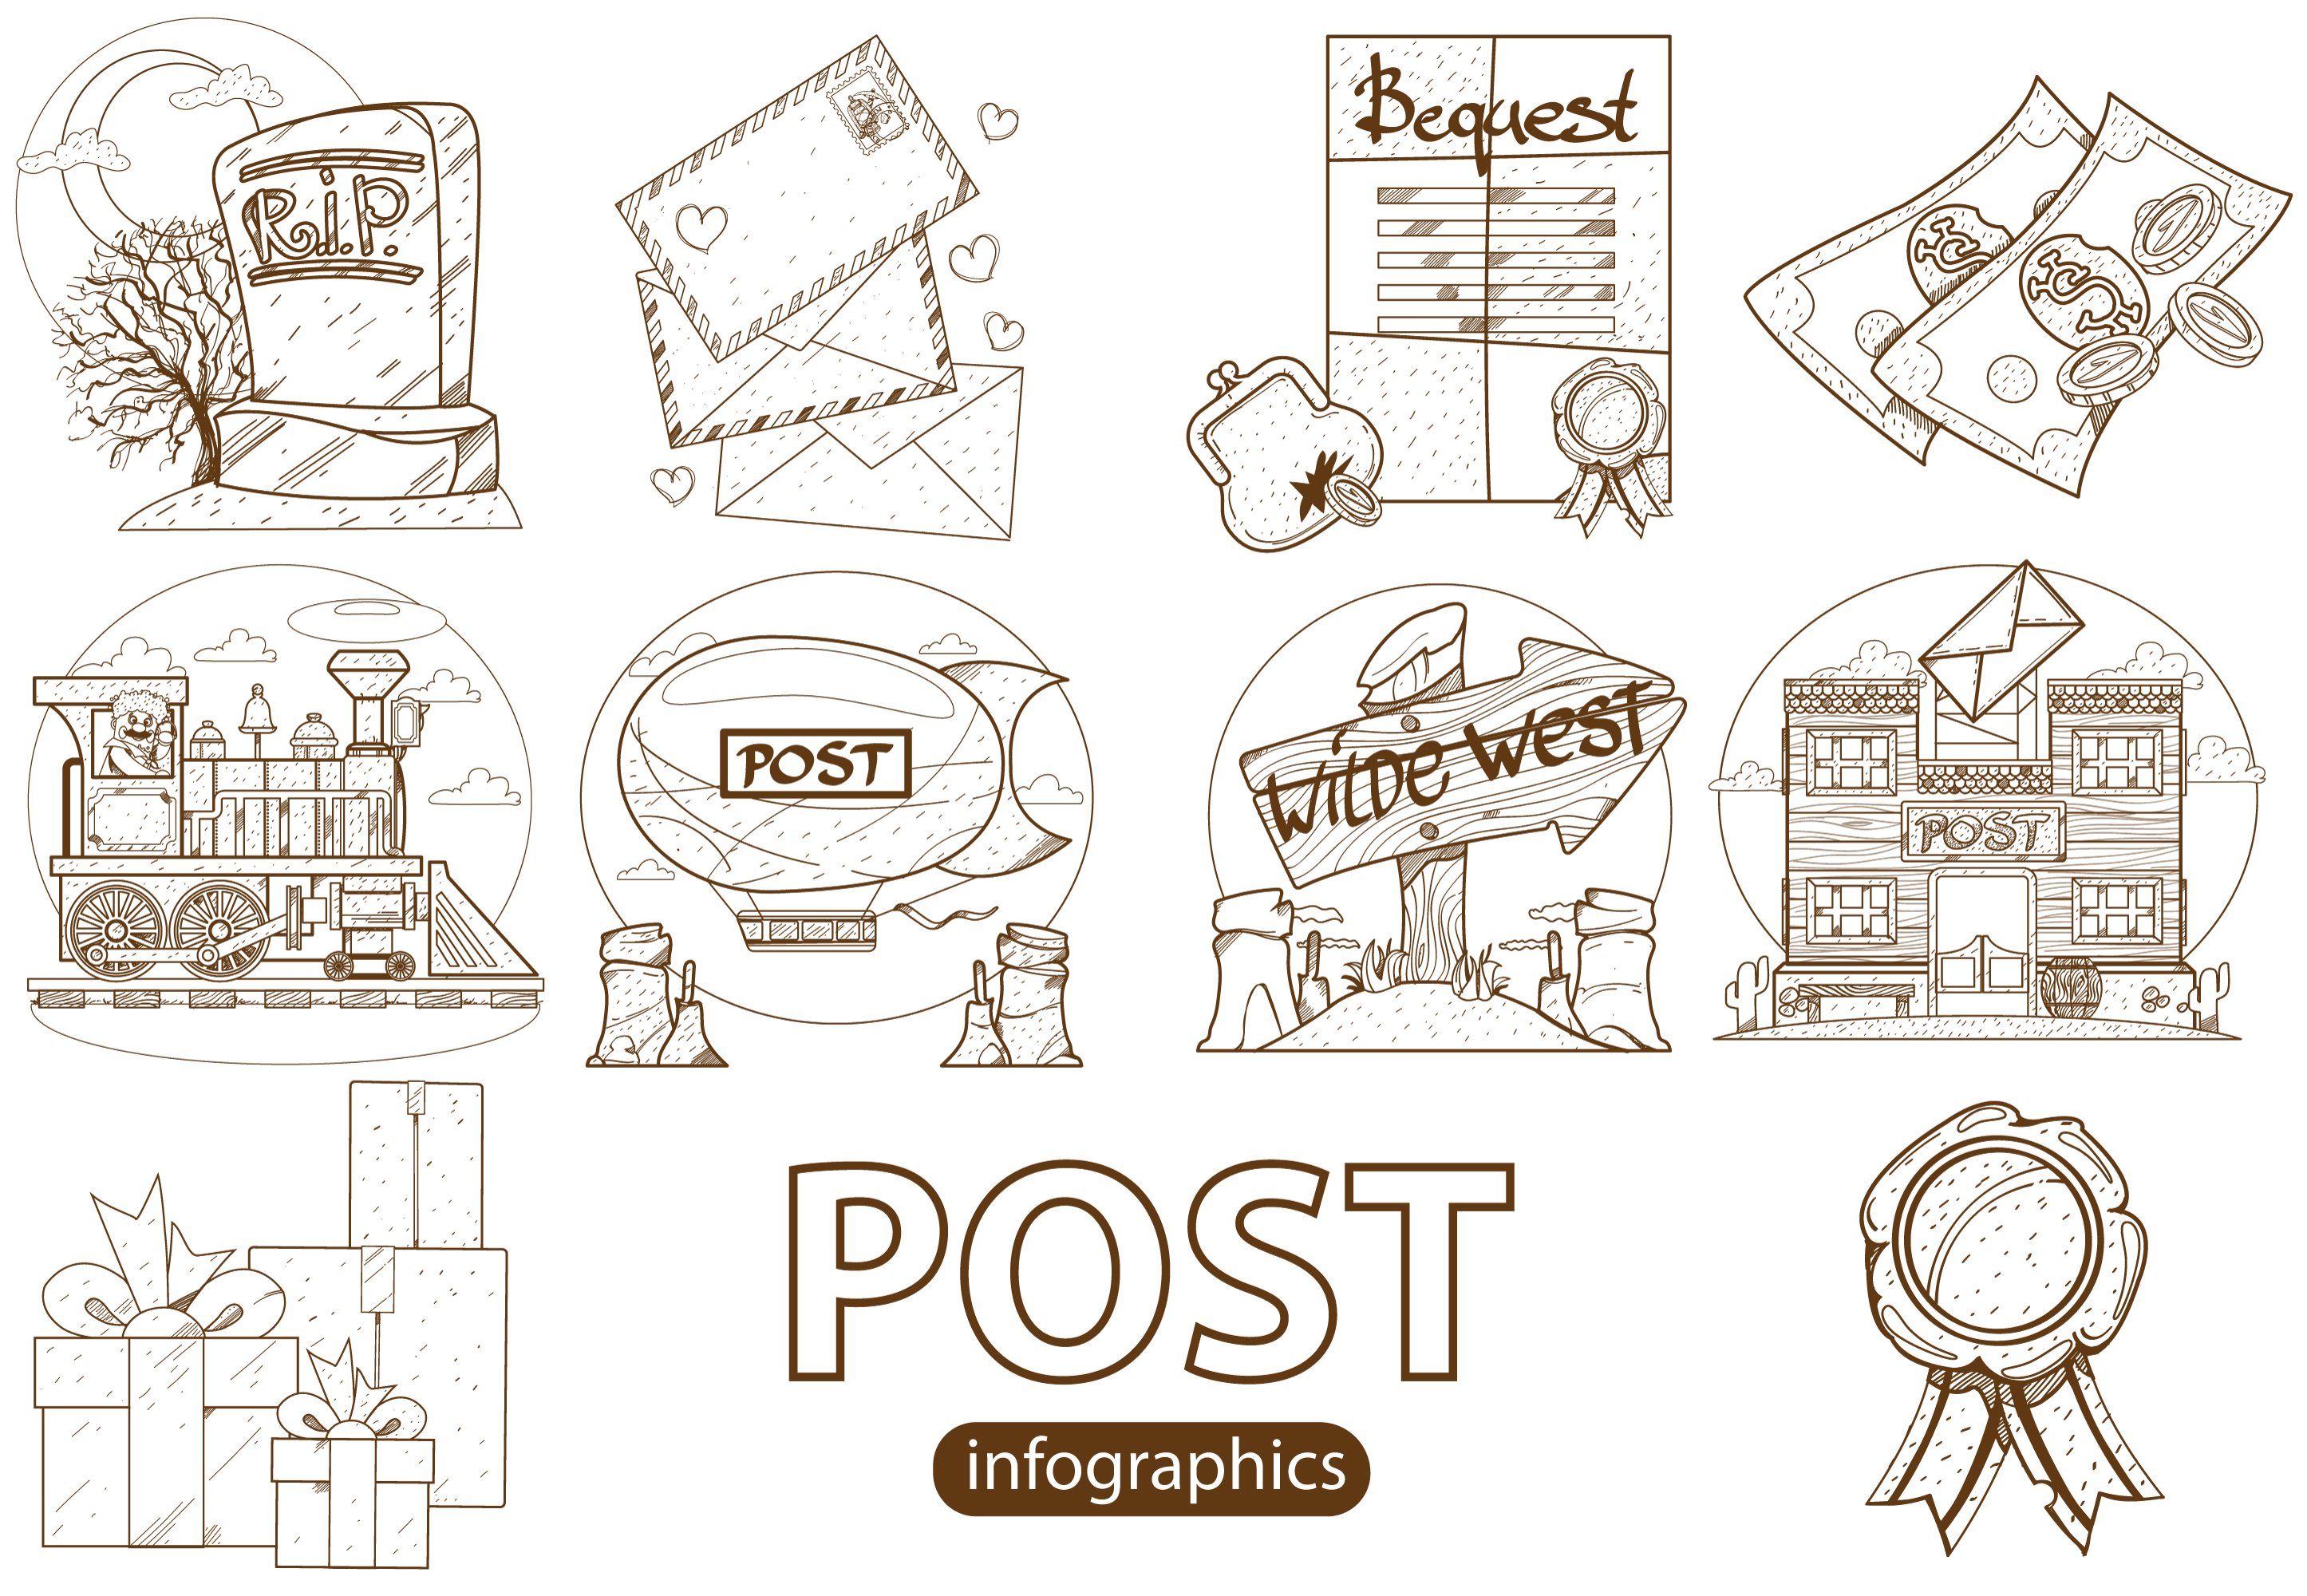 Post Office Building Image & Photo (Free Trial) | Bigstock